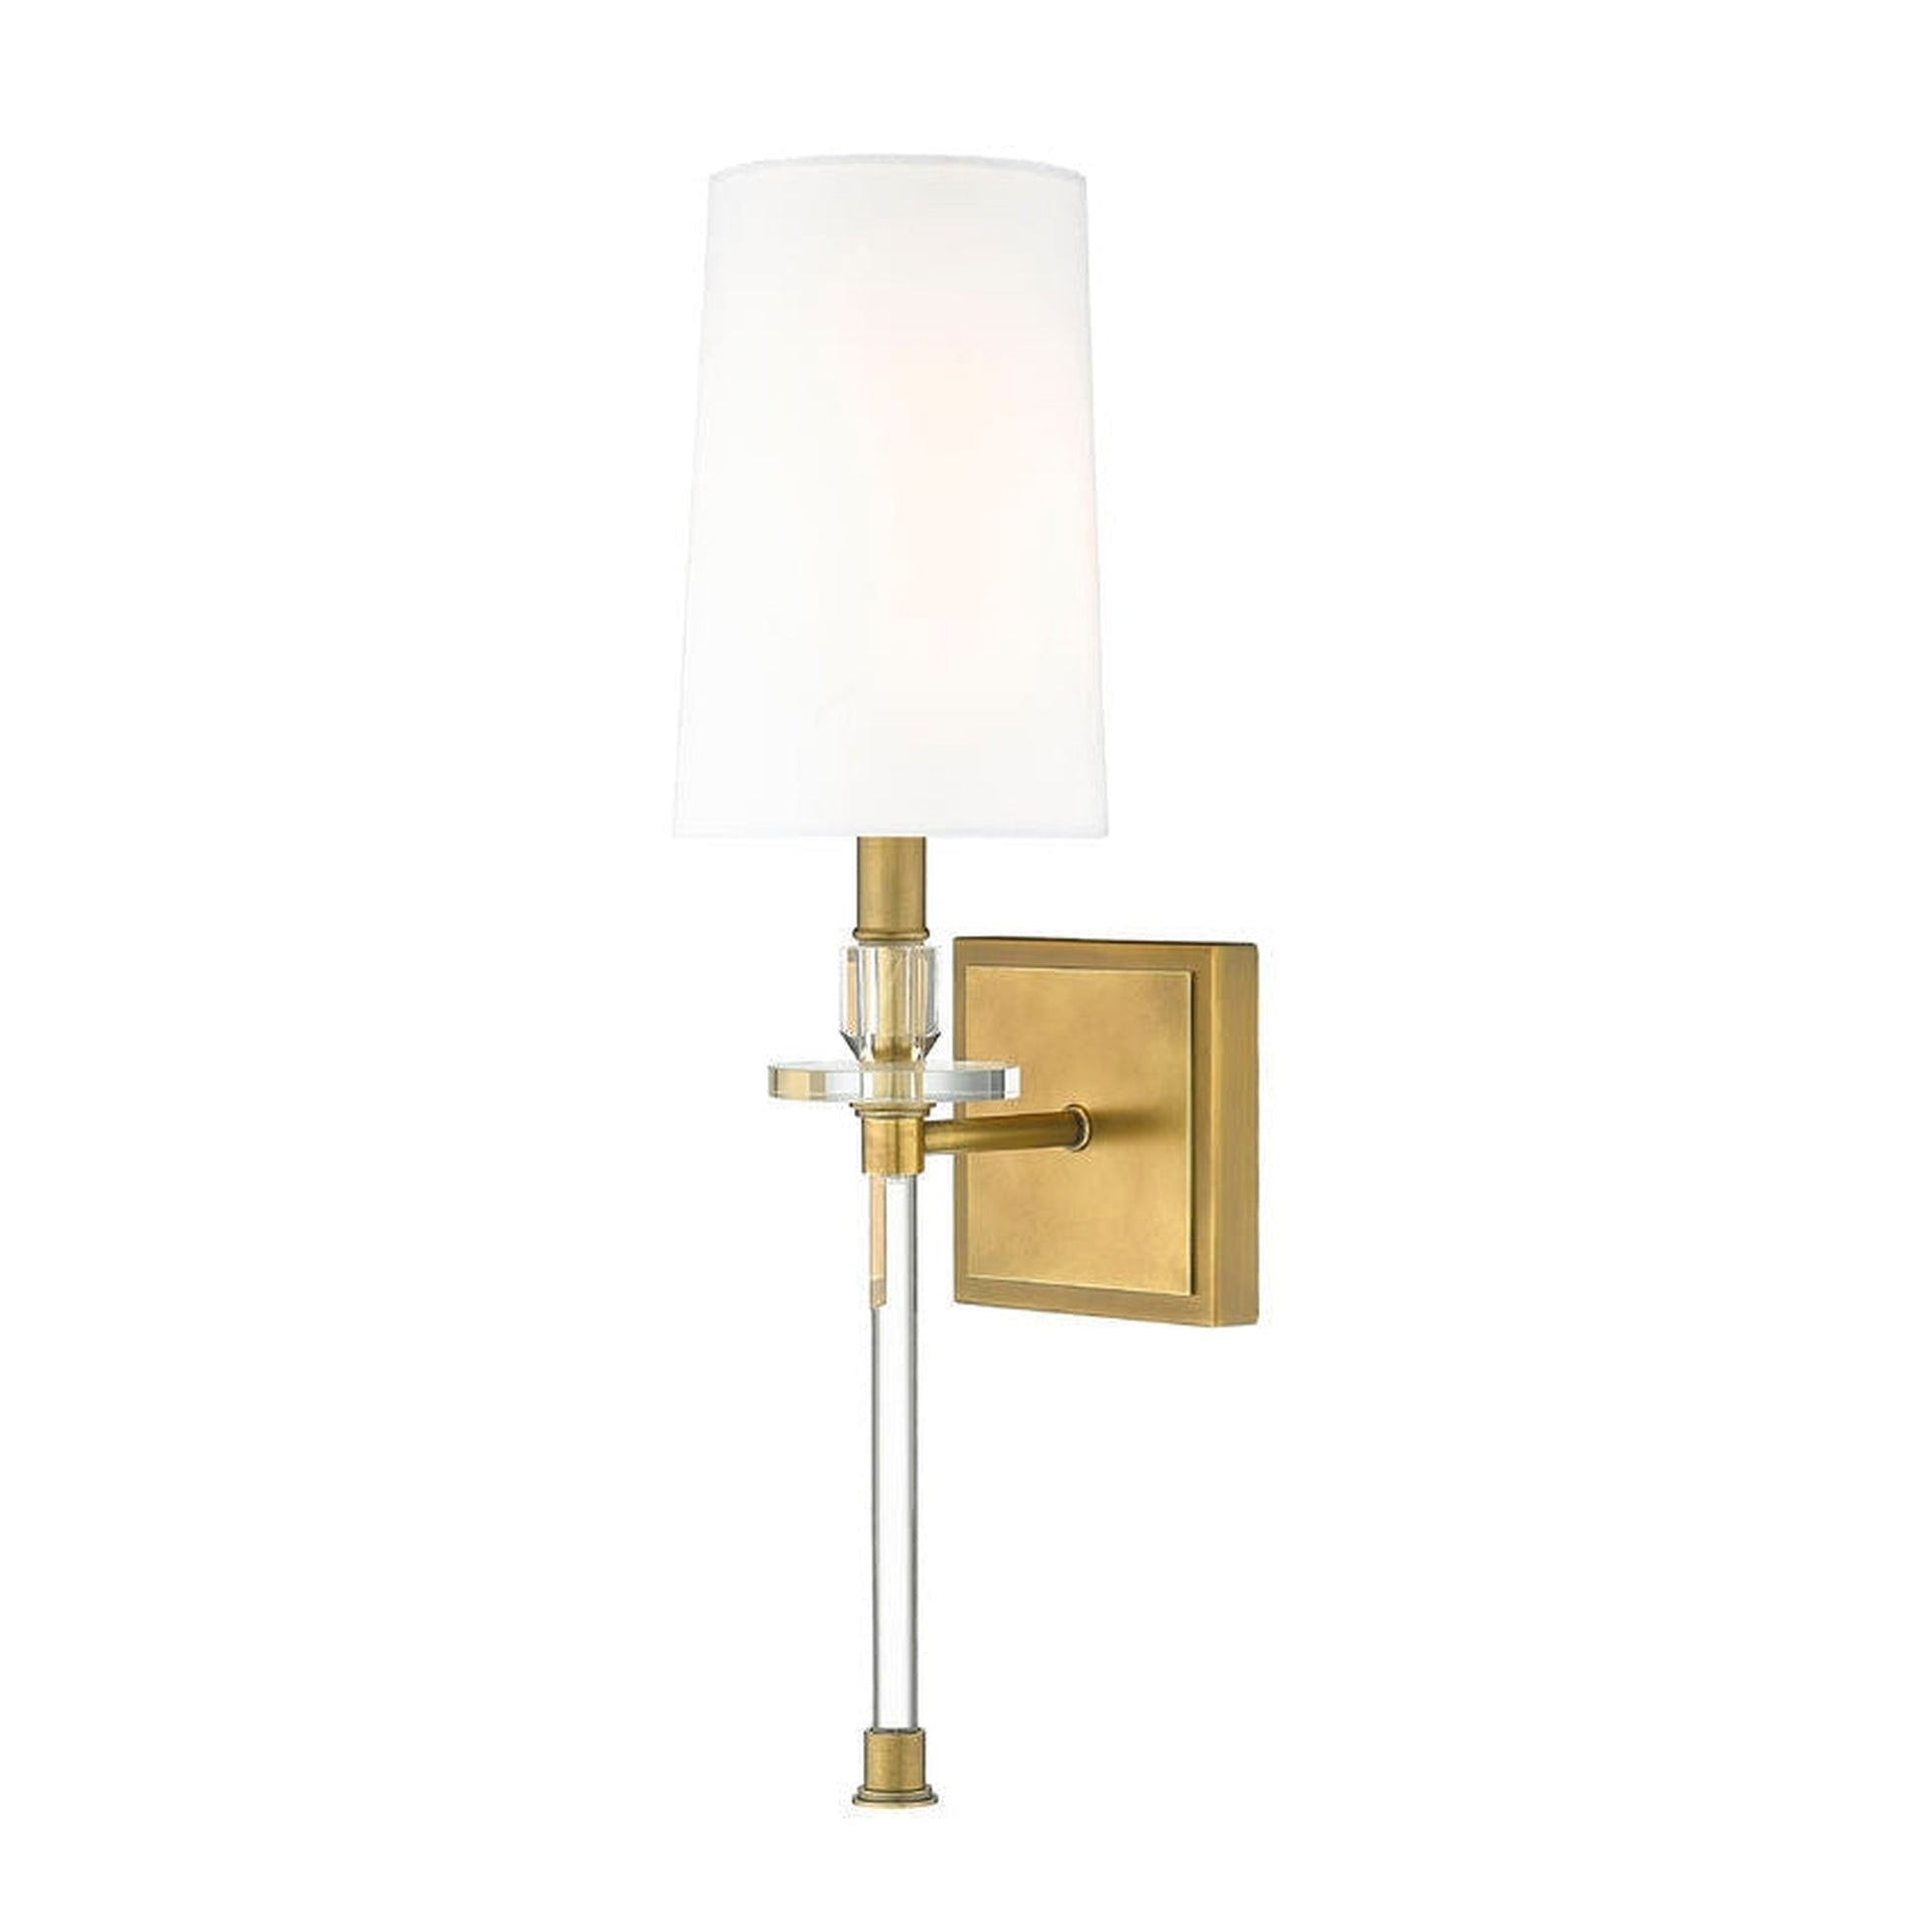 Z-Lite Sophia 6" 1-Light Rubbed Brass Wall Sconce With White Fabric Shade